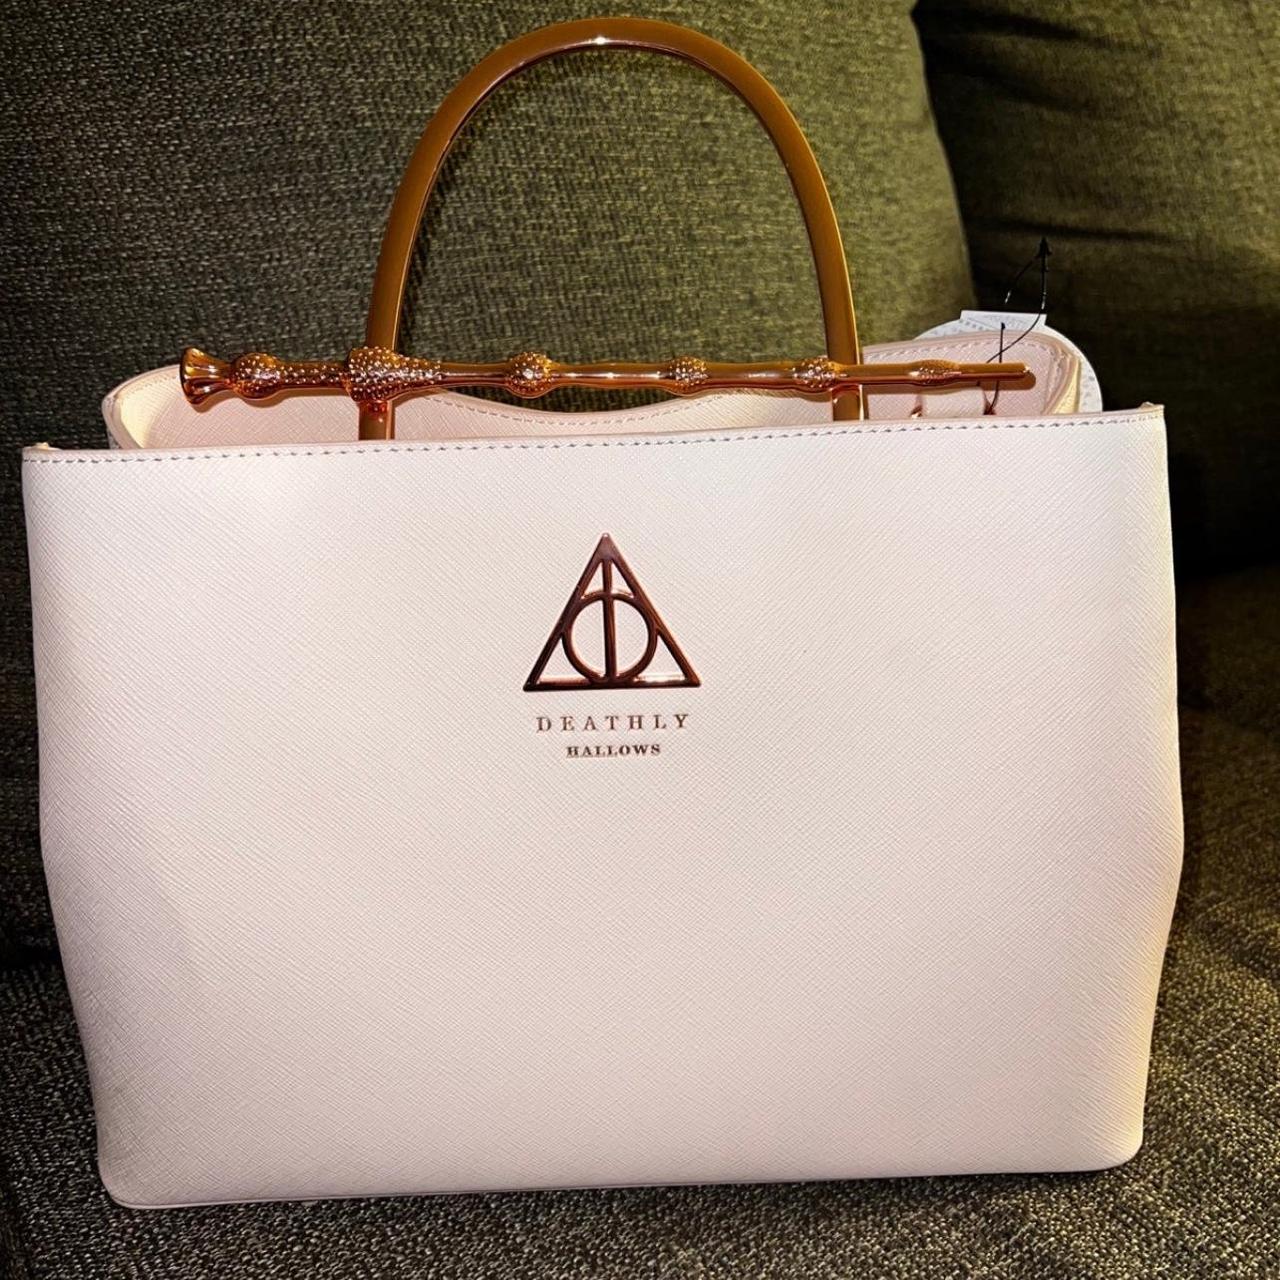 Amazon.com: Vinylcation Deathly Hallows Always Wristlet for Keys, ID Badge,  Cellphone, or Clutch Purse Accessory Wrist Lanyard : Office Products